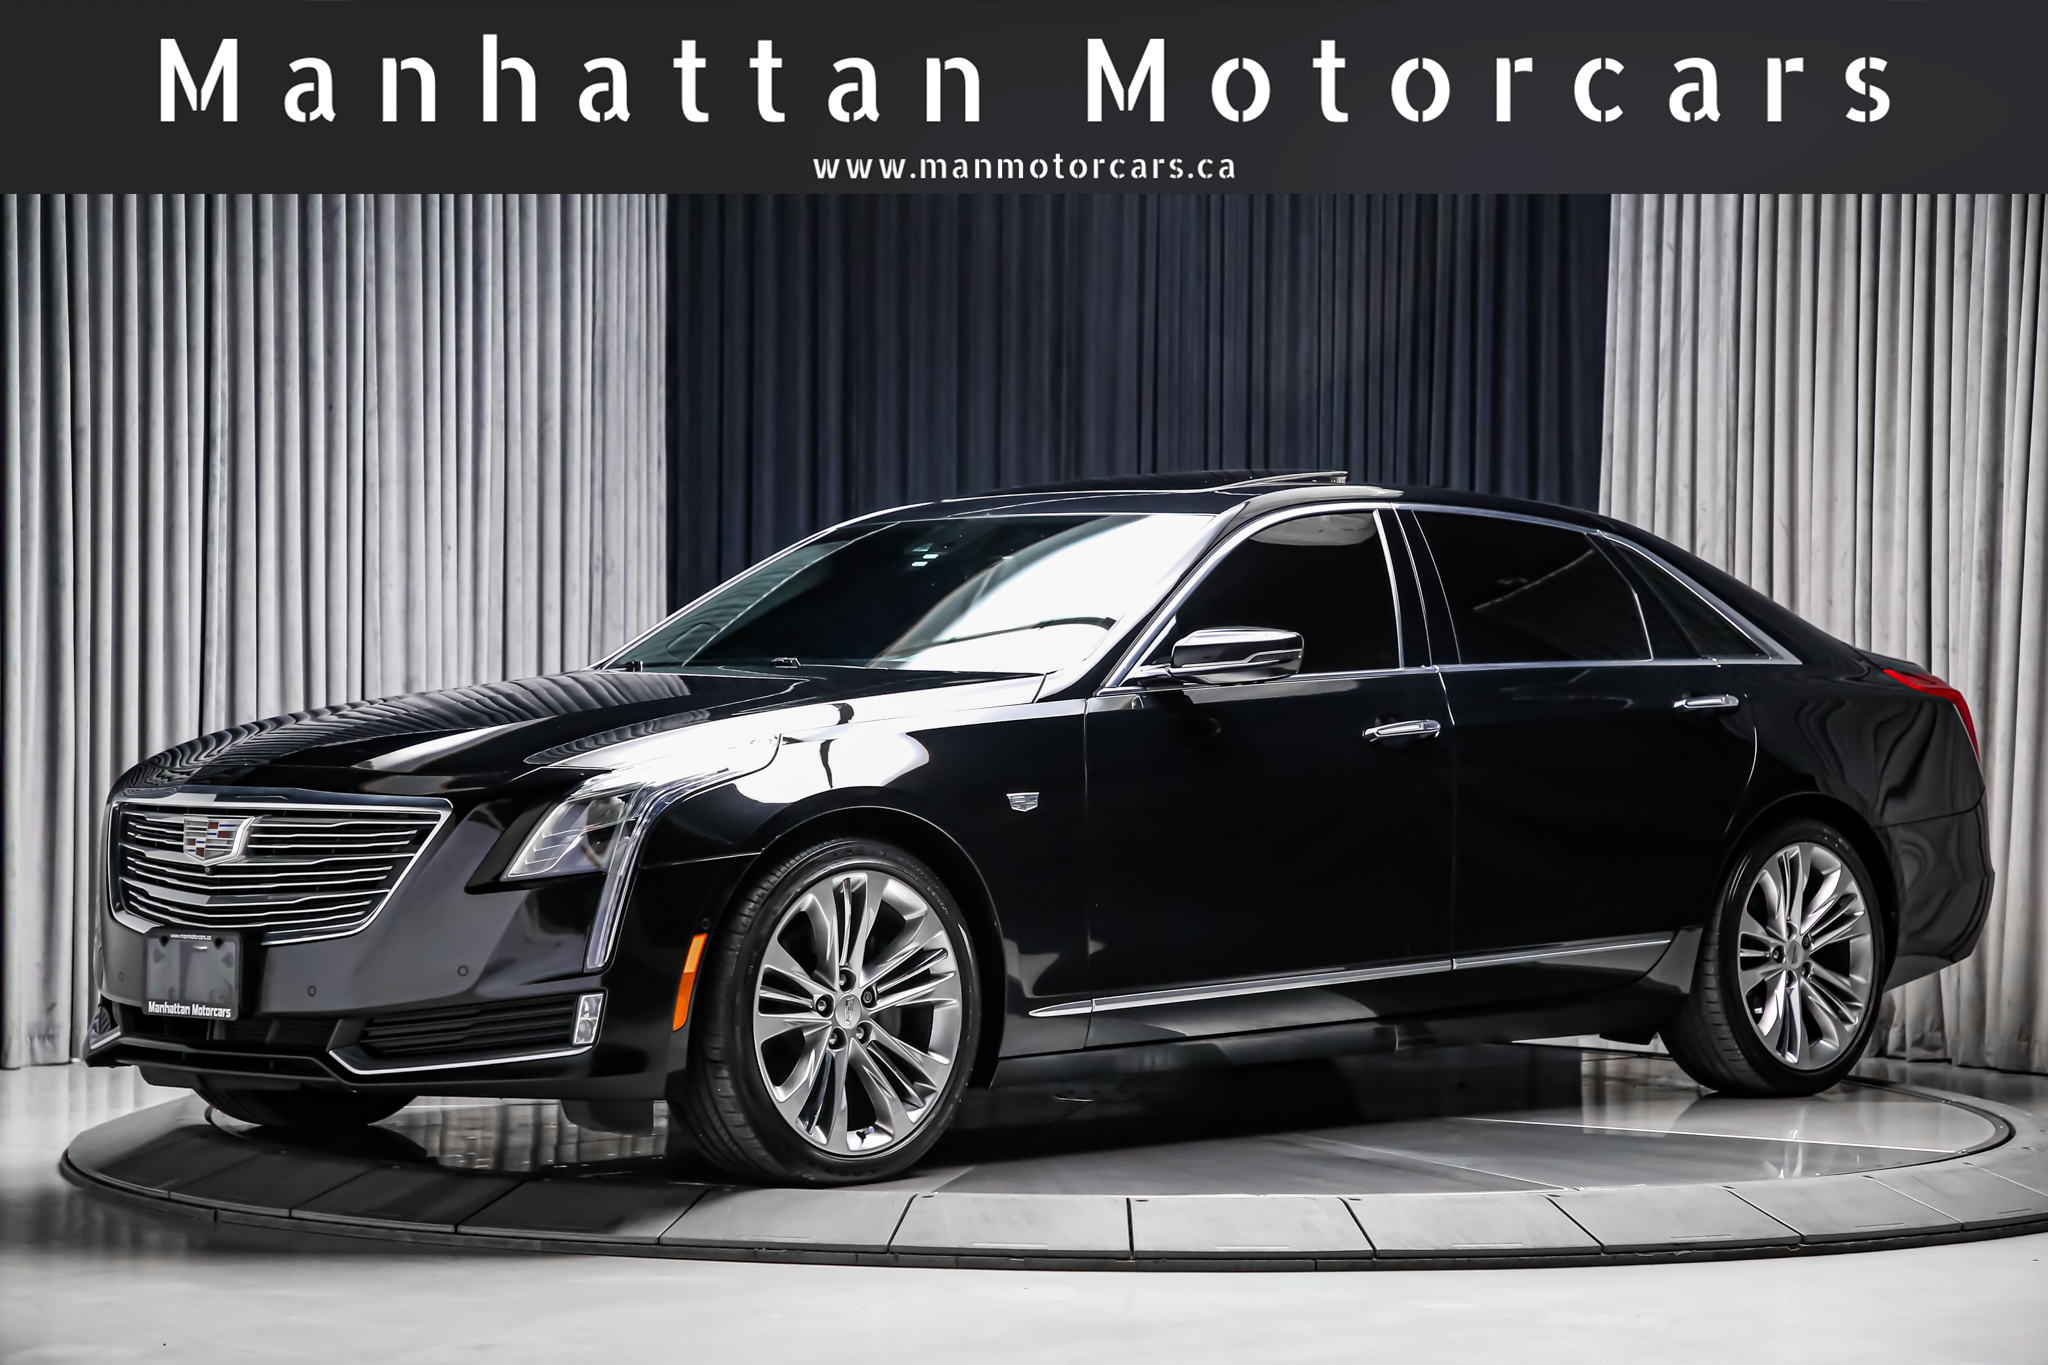 2016 Cadillac CT6 PLATINUM AWD 3.0L TWIN TURBO|NOACCIDENT|FULYLOADED